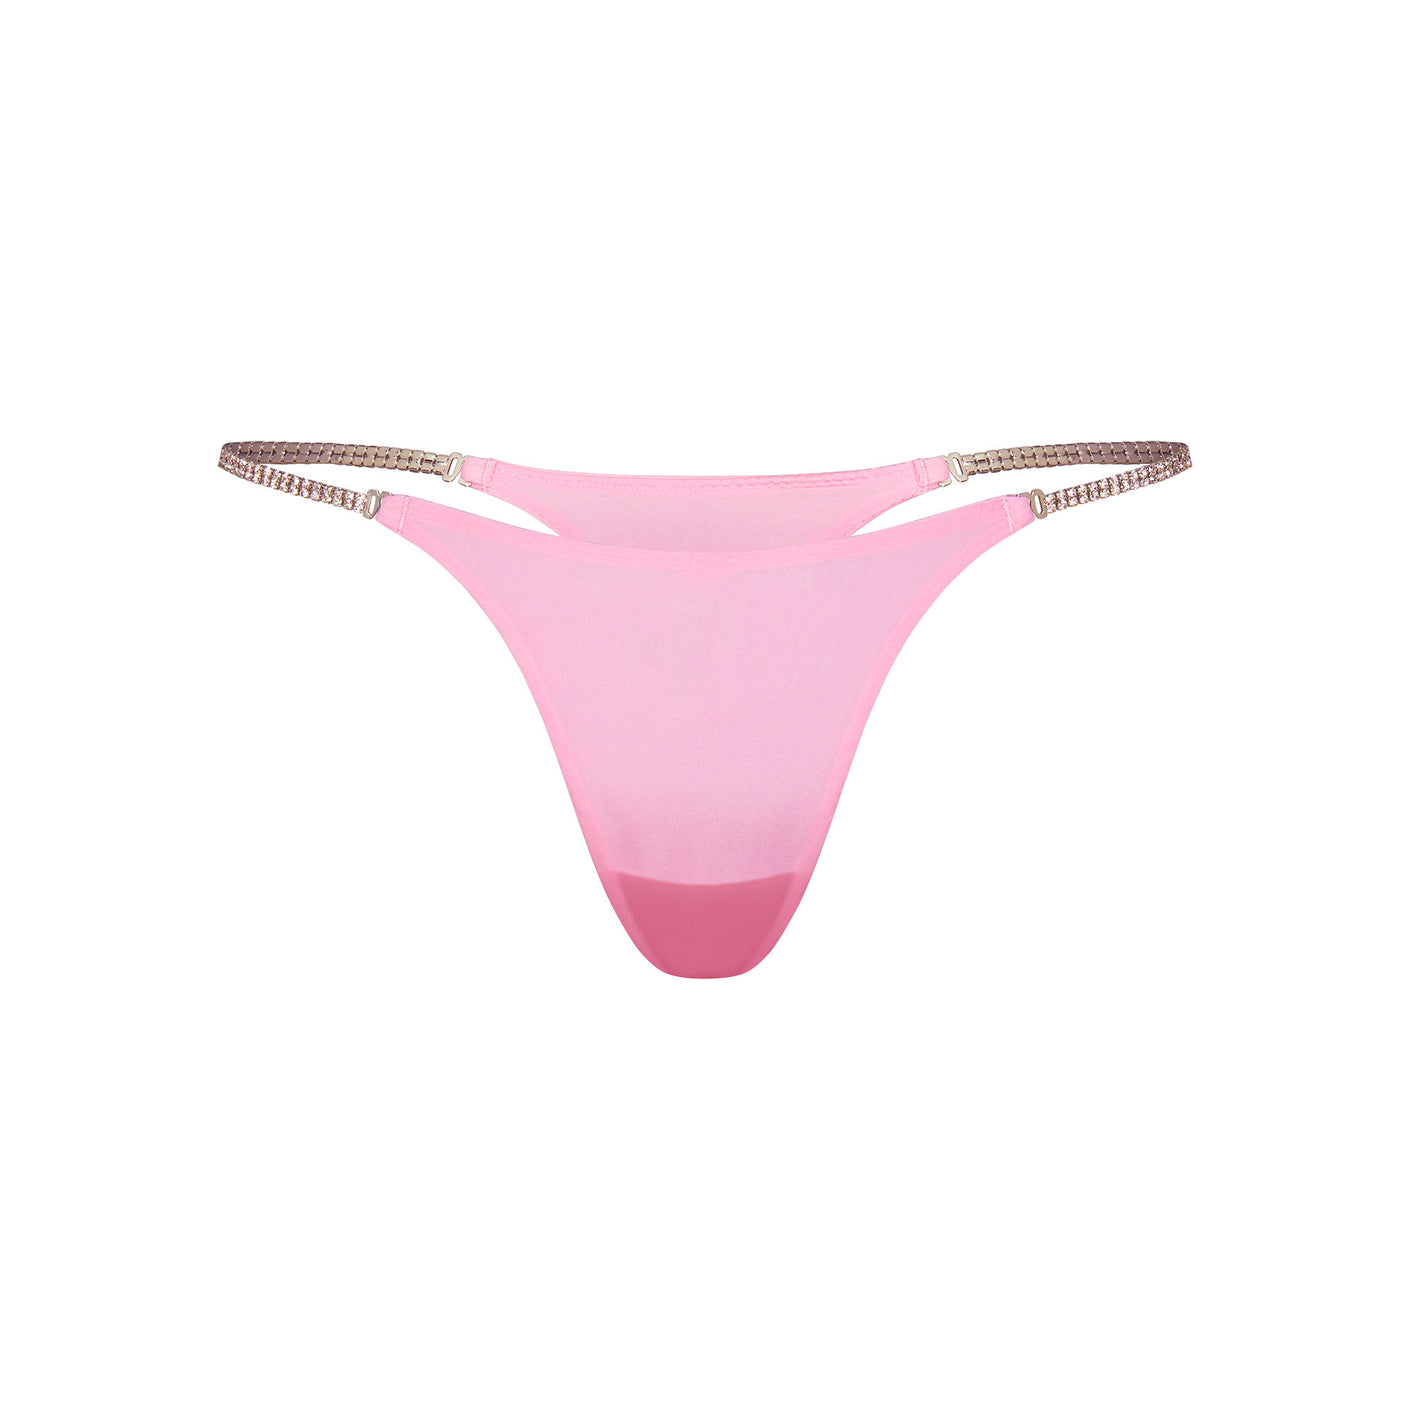 JELLY SHEER CRYSTAL CHAIN SIDE THONG | BUBBLE GUM